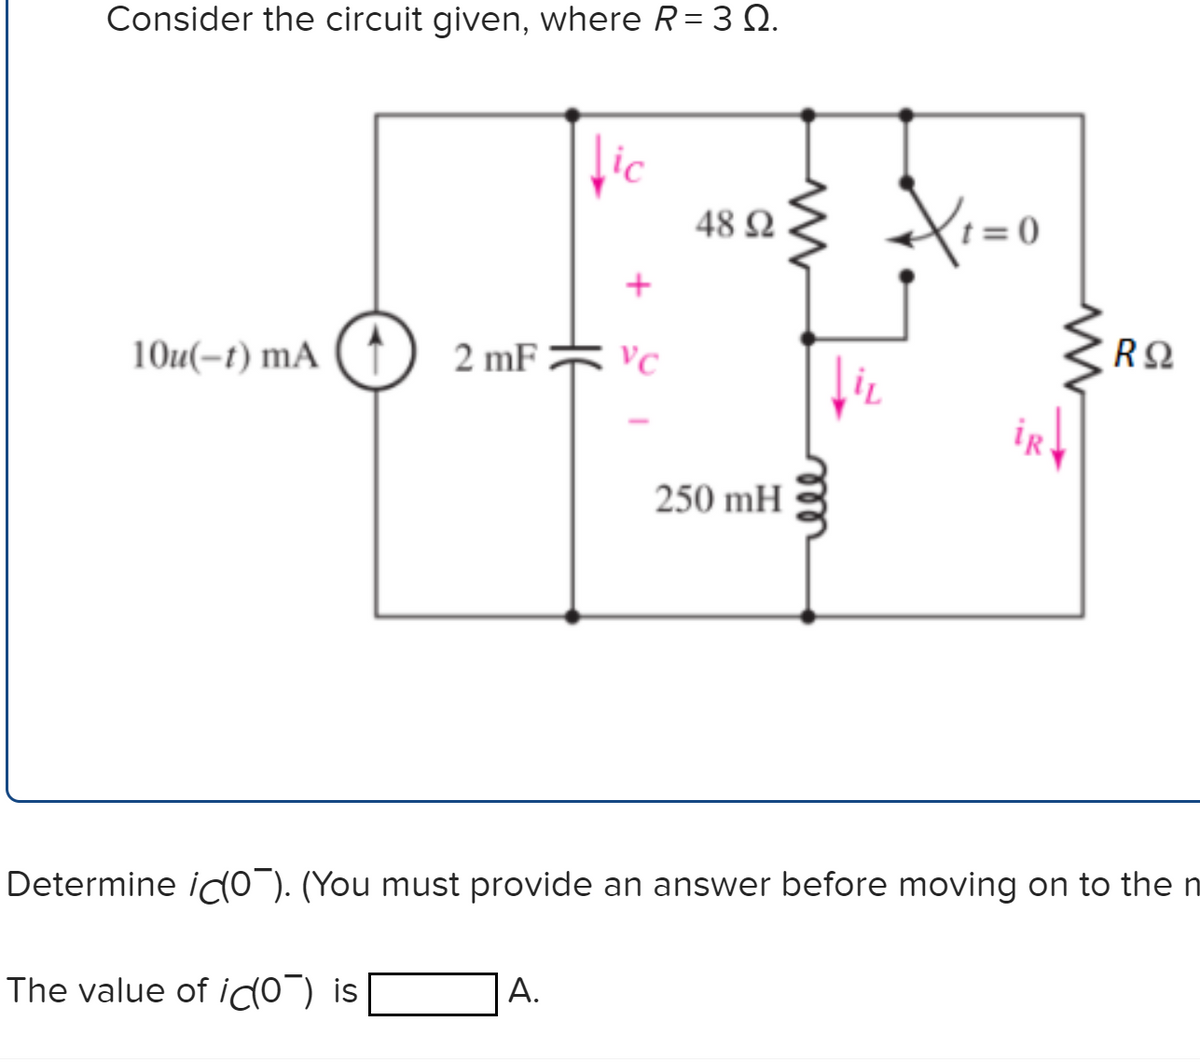 Consider the circuit given, where R= 3 Q.
lic
48 Ω
10u(-t) mA ( ↑
2 mF * vc
VC
iR
250 mH
Determine id0"). (You must provide an answer before moving on to the n
A.
The value of ido) is
II
